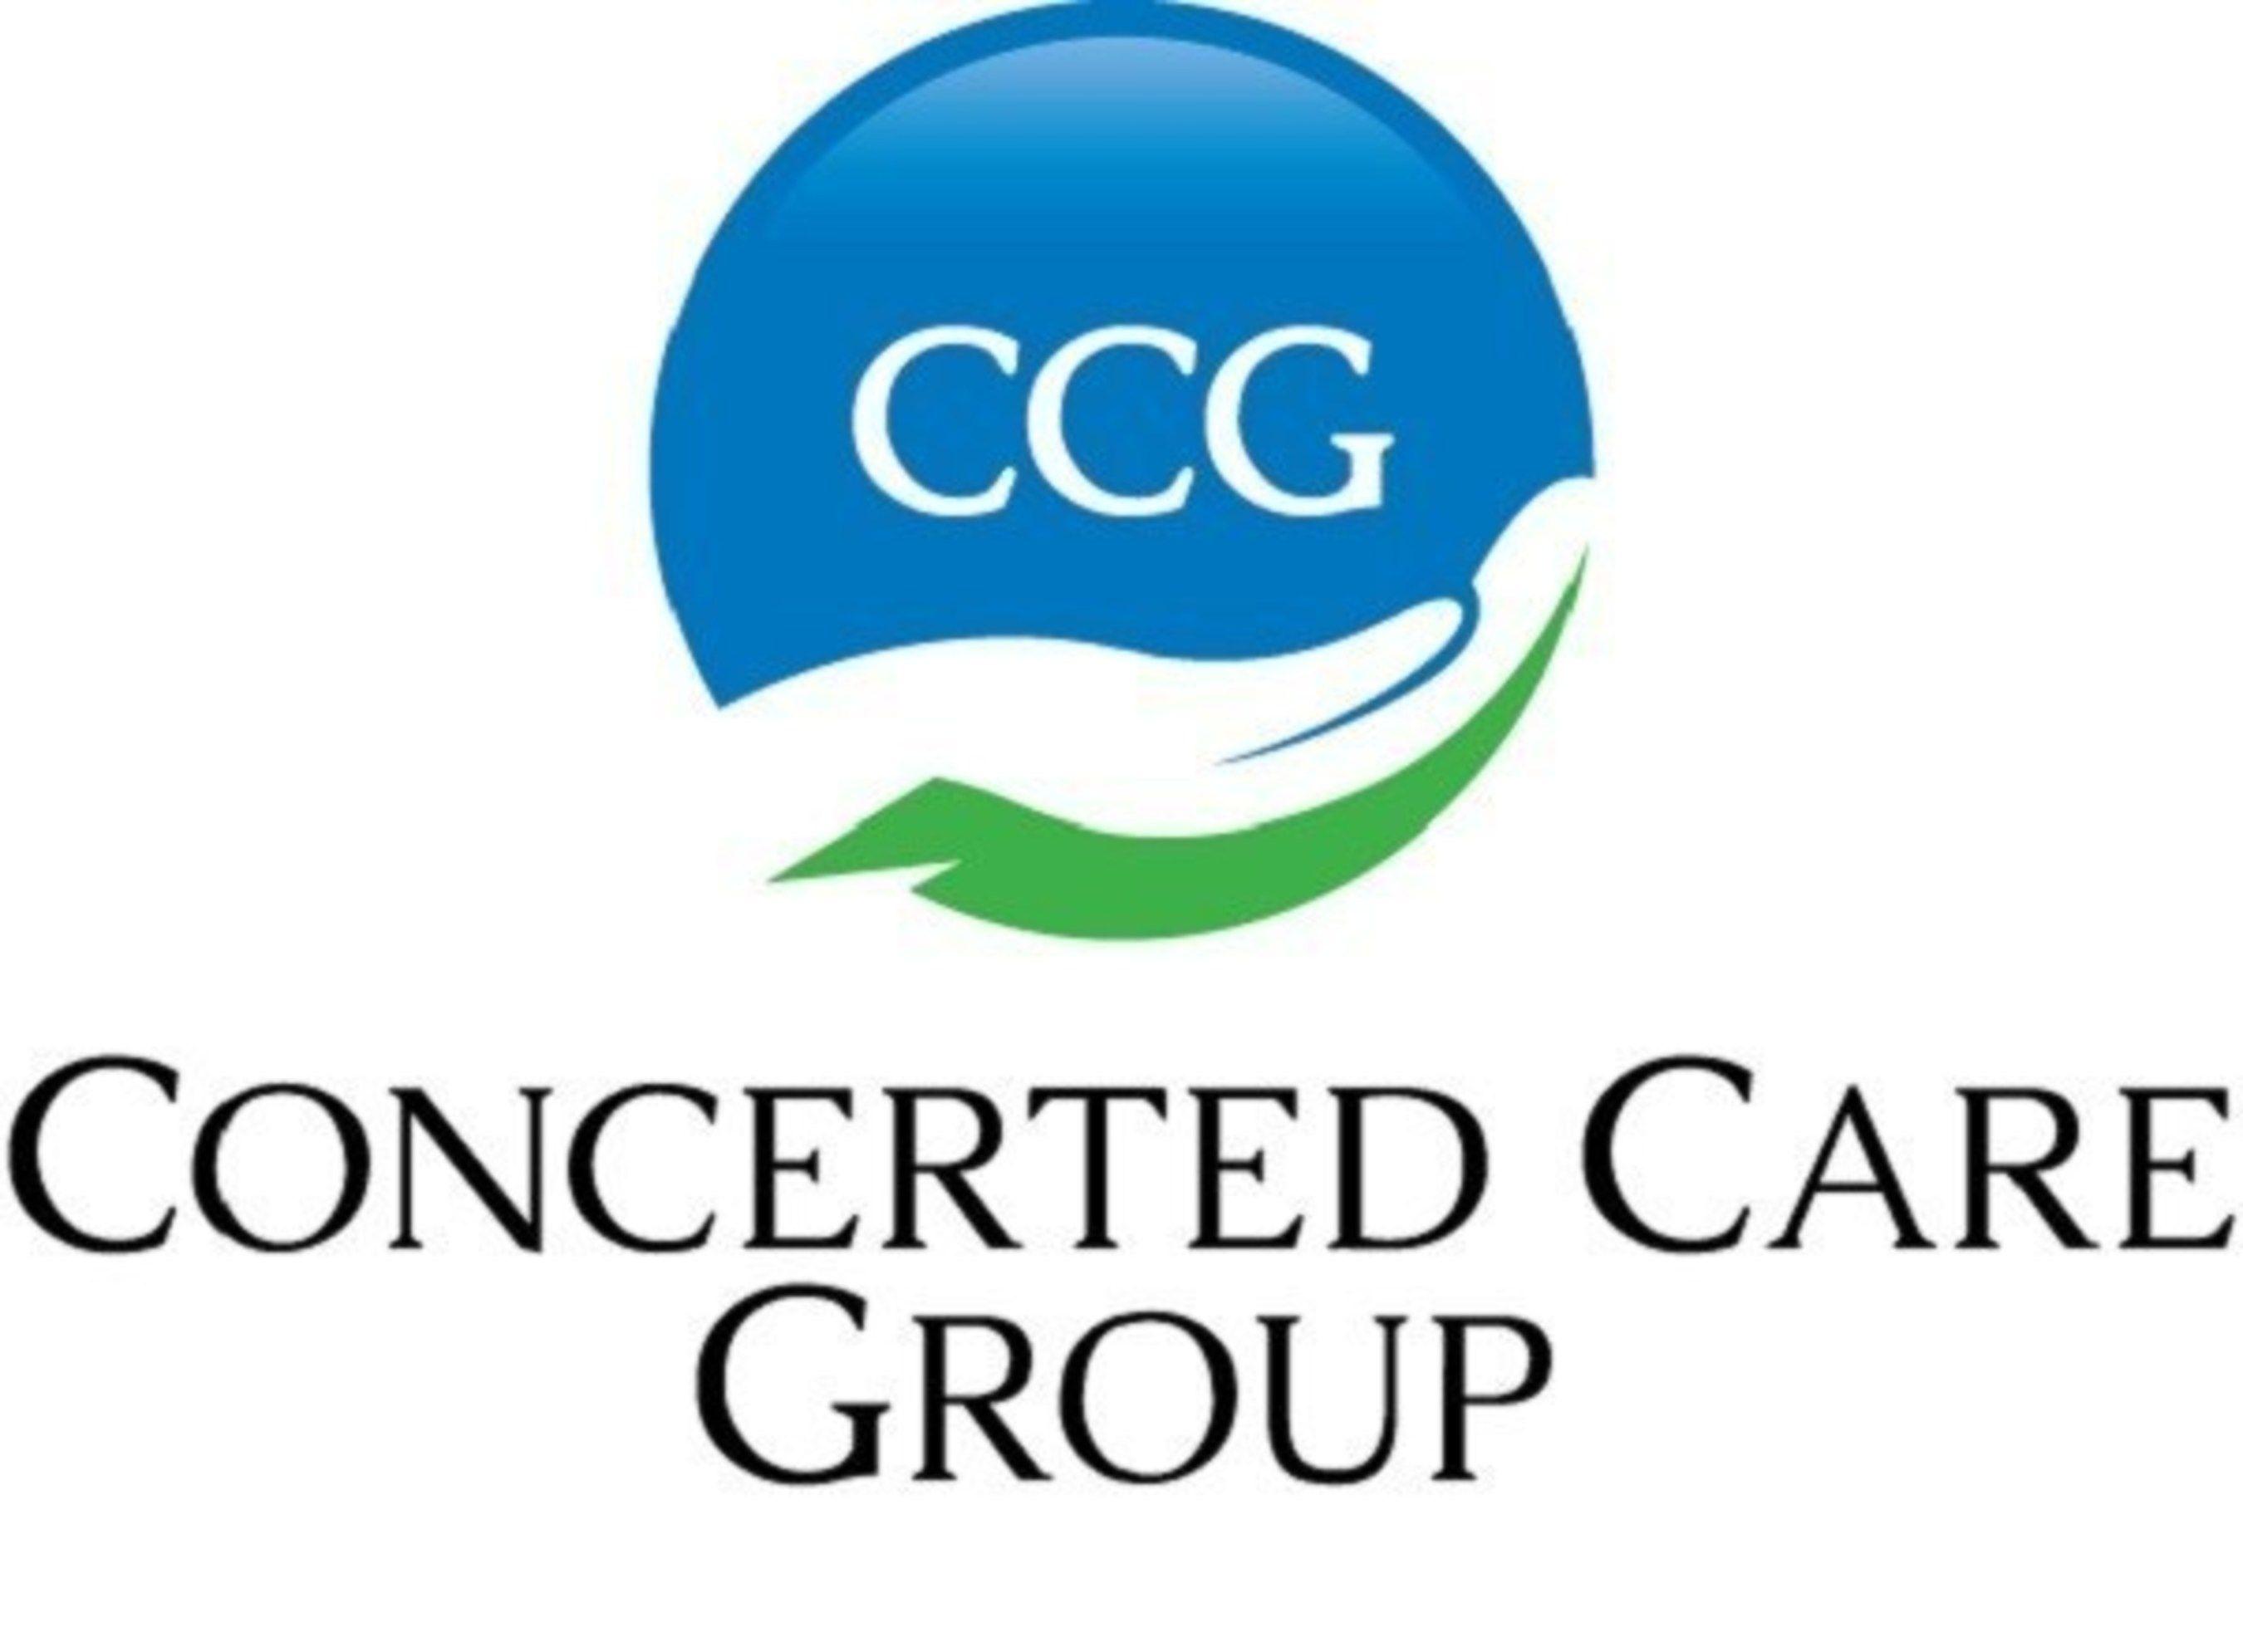 CARF Logo - Concerted Care Group Awarded Three Year CARF Accreditation